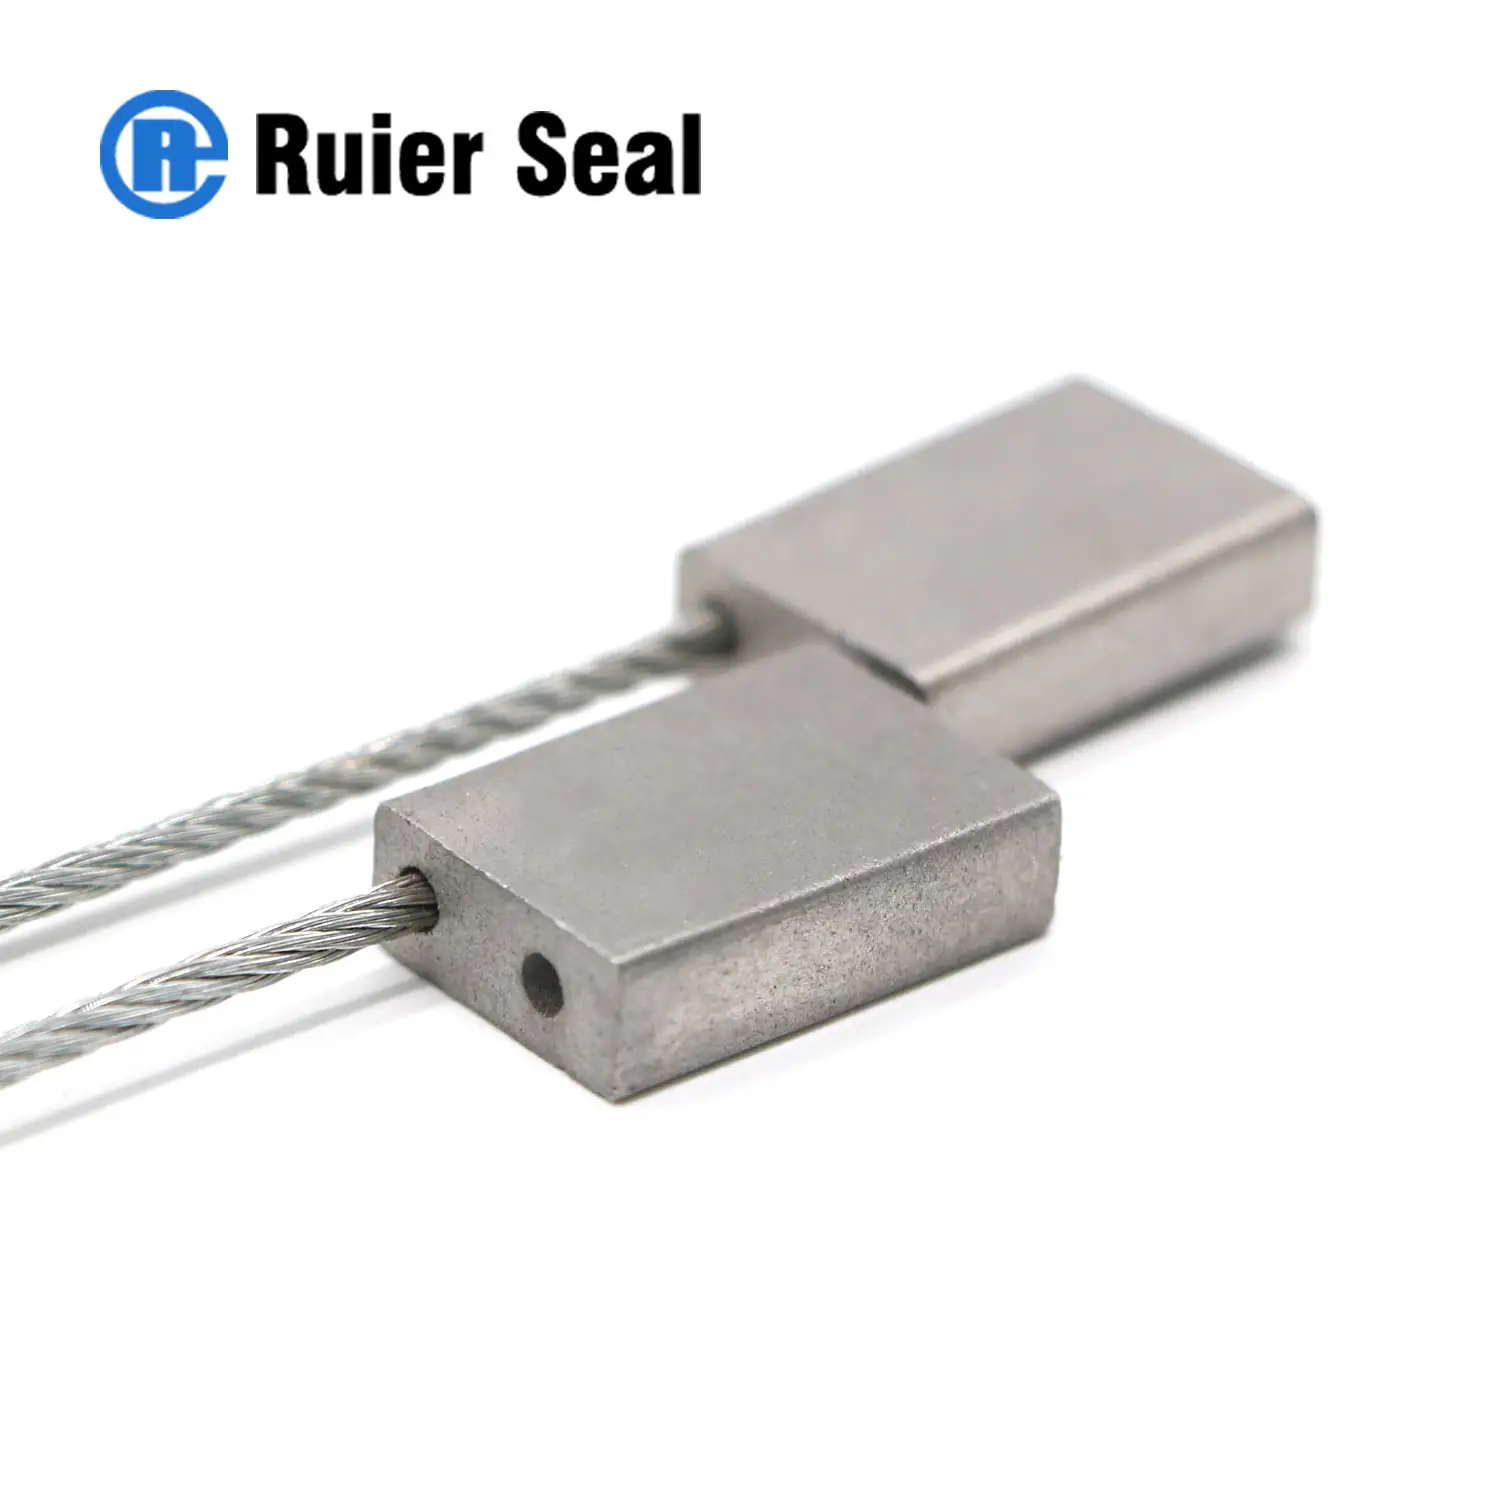 REC 002 outdoor cable seal hex cable container seals